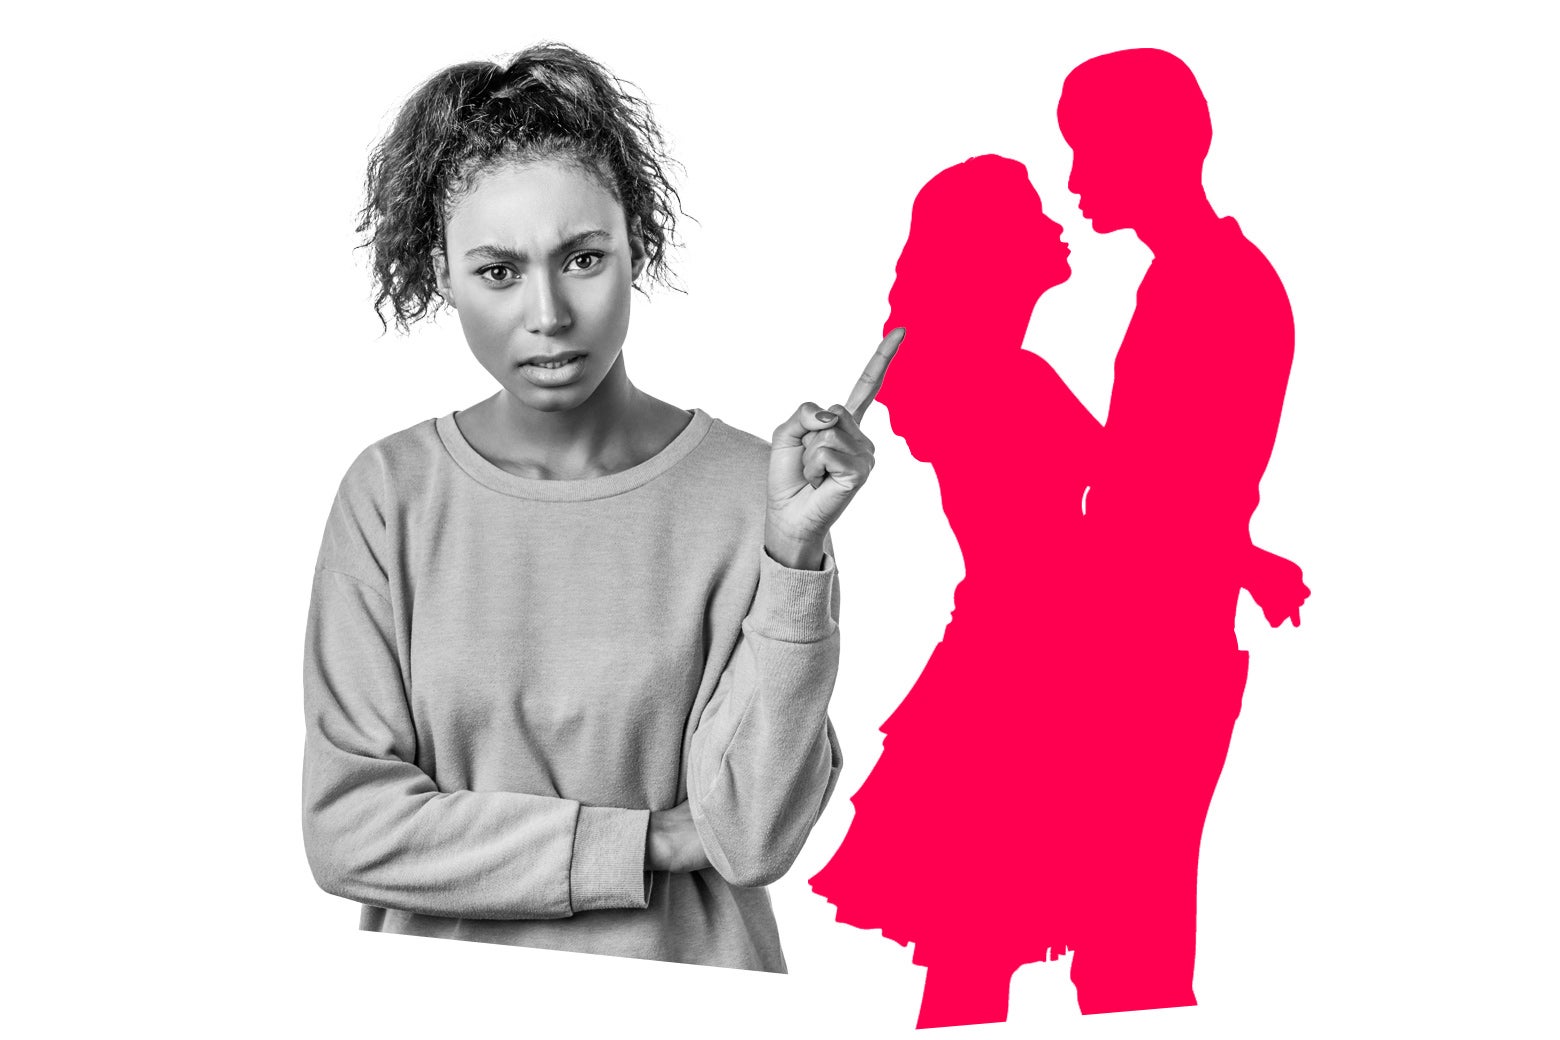 A woman points angrily at the illustrated silhouette of a couple.